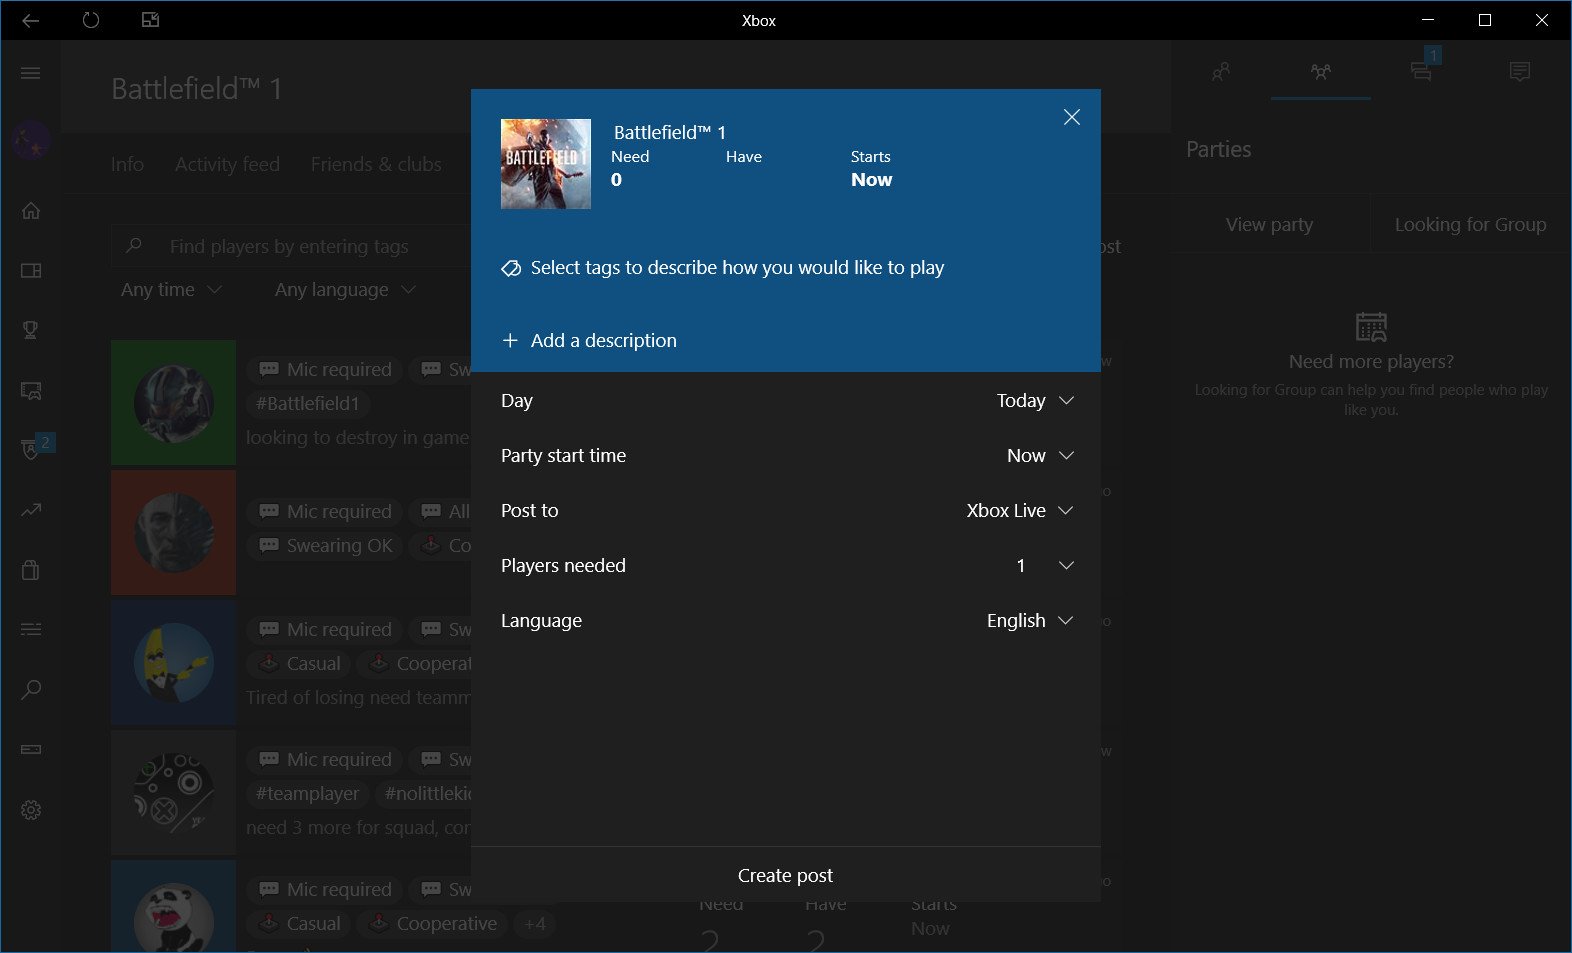 How To Create A Looking For Group Post On Xbox One And Windows 10